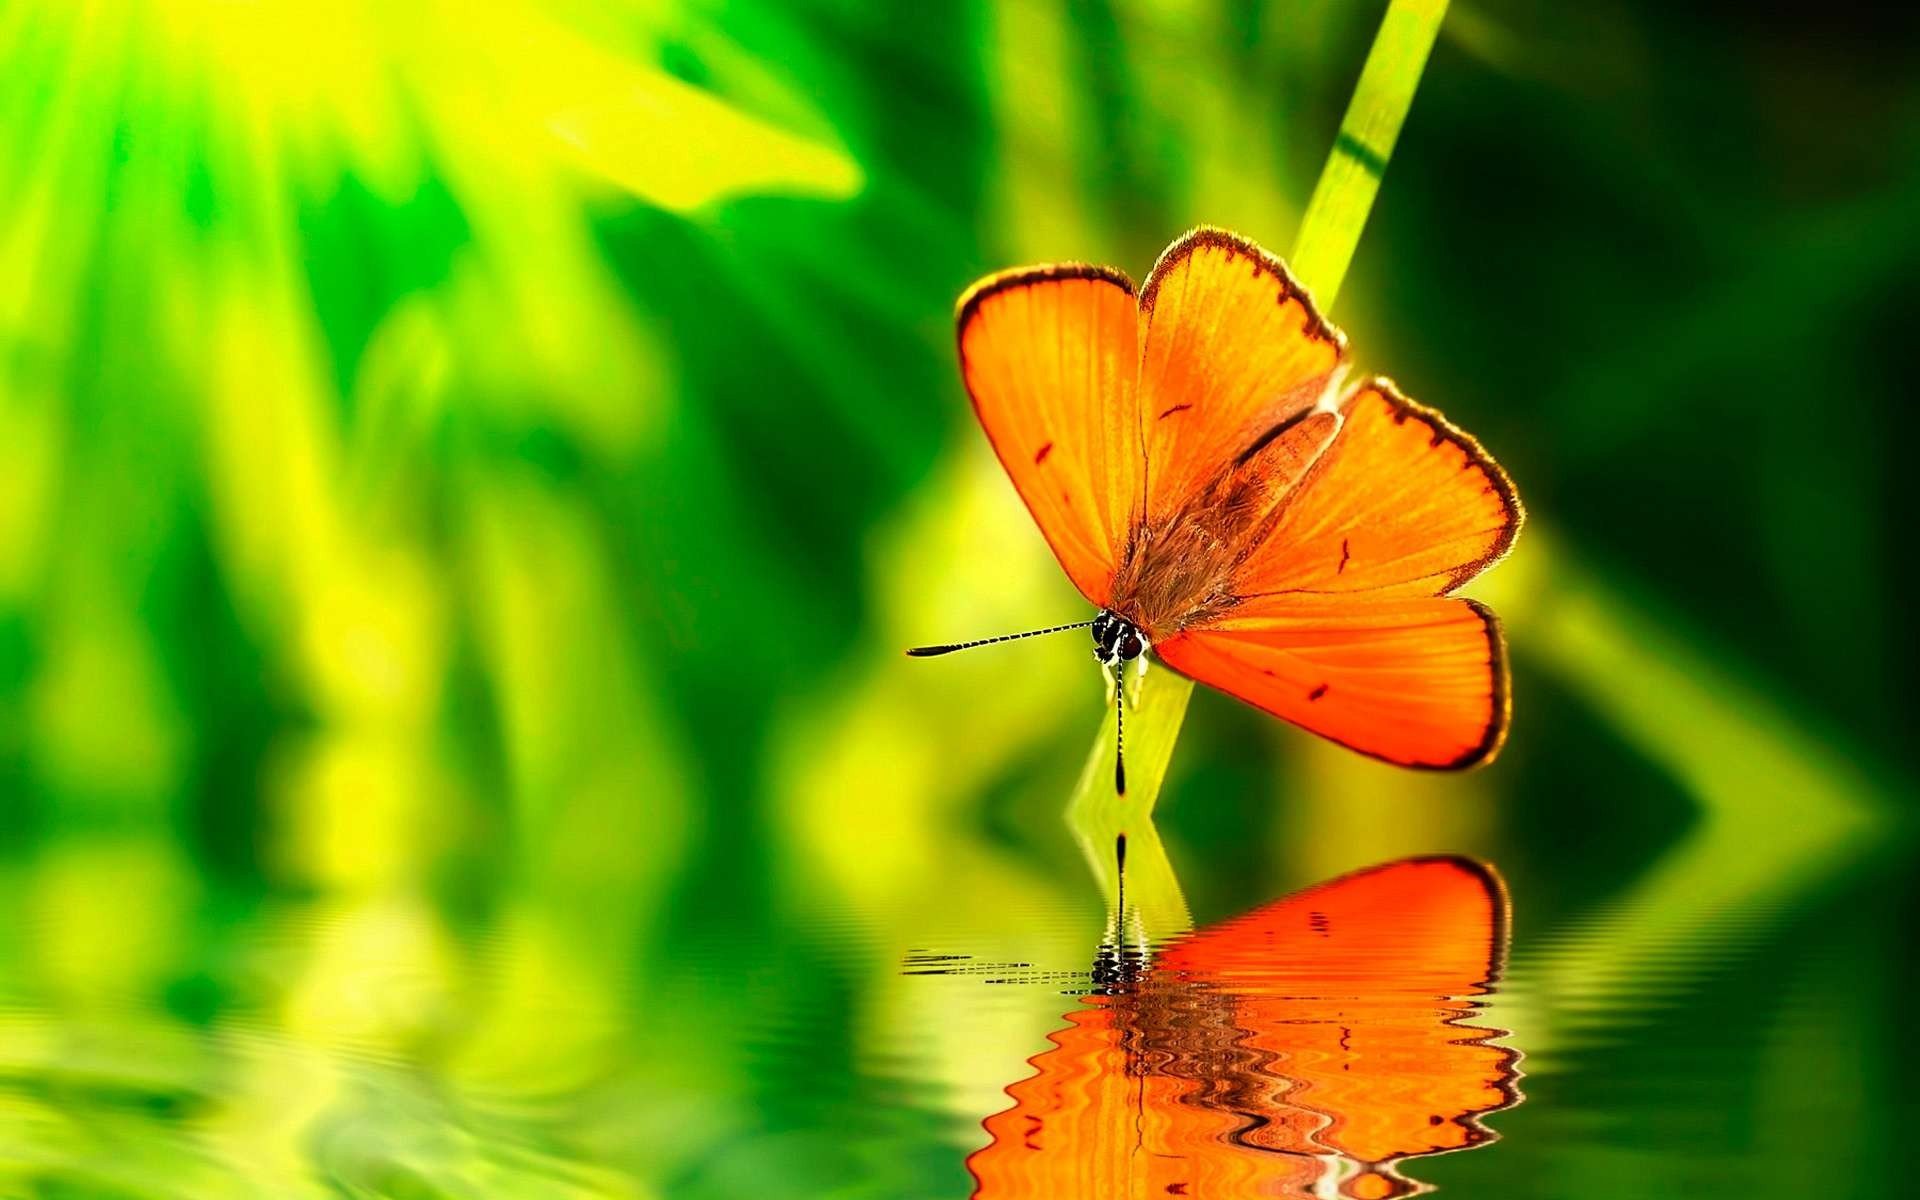 green, Water, Nature, Orange, Insects, Wildlife, Reflections, Blurred, Background, Butterflies Wallpaper